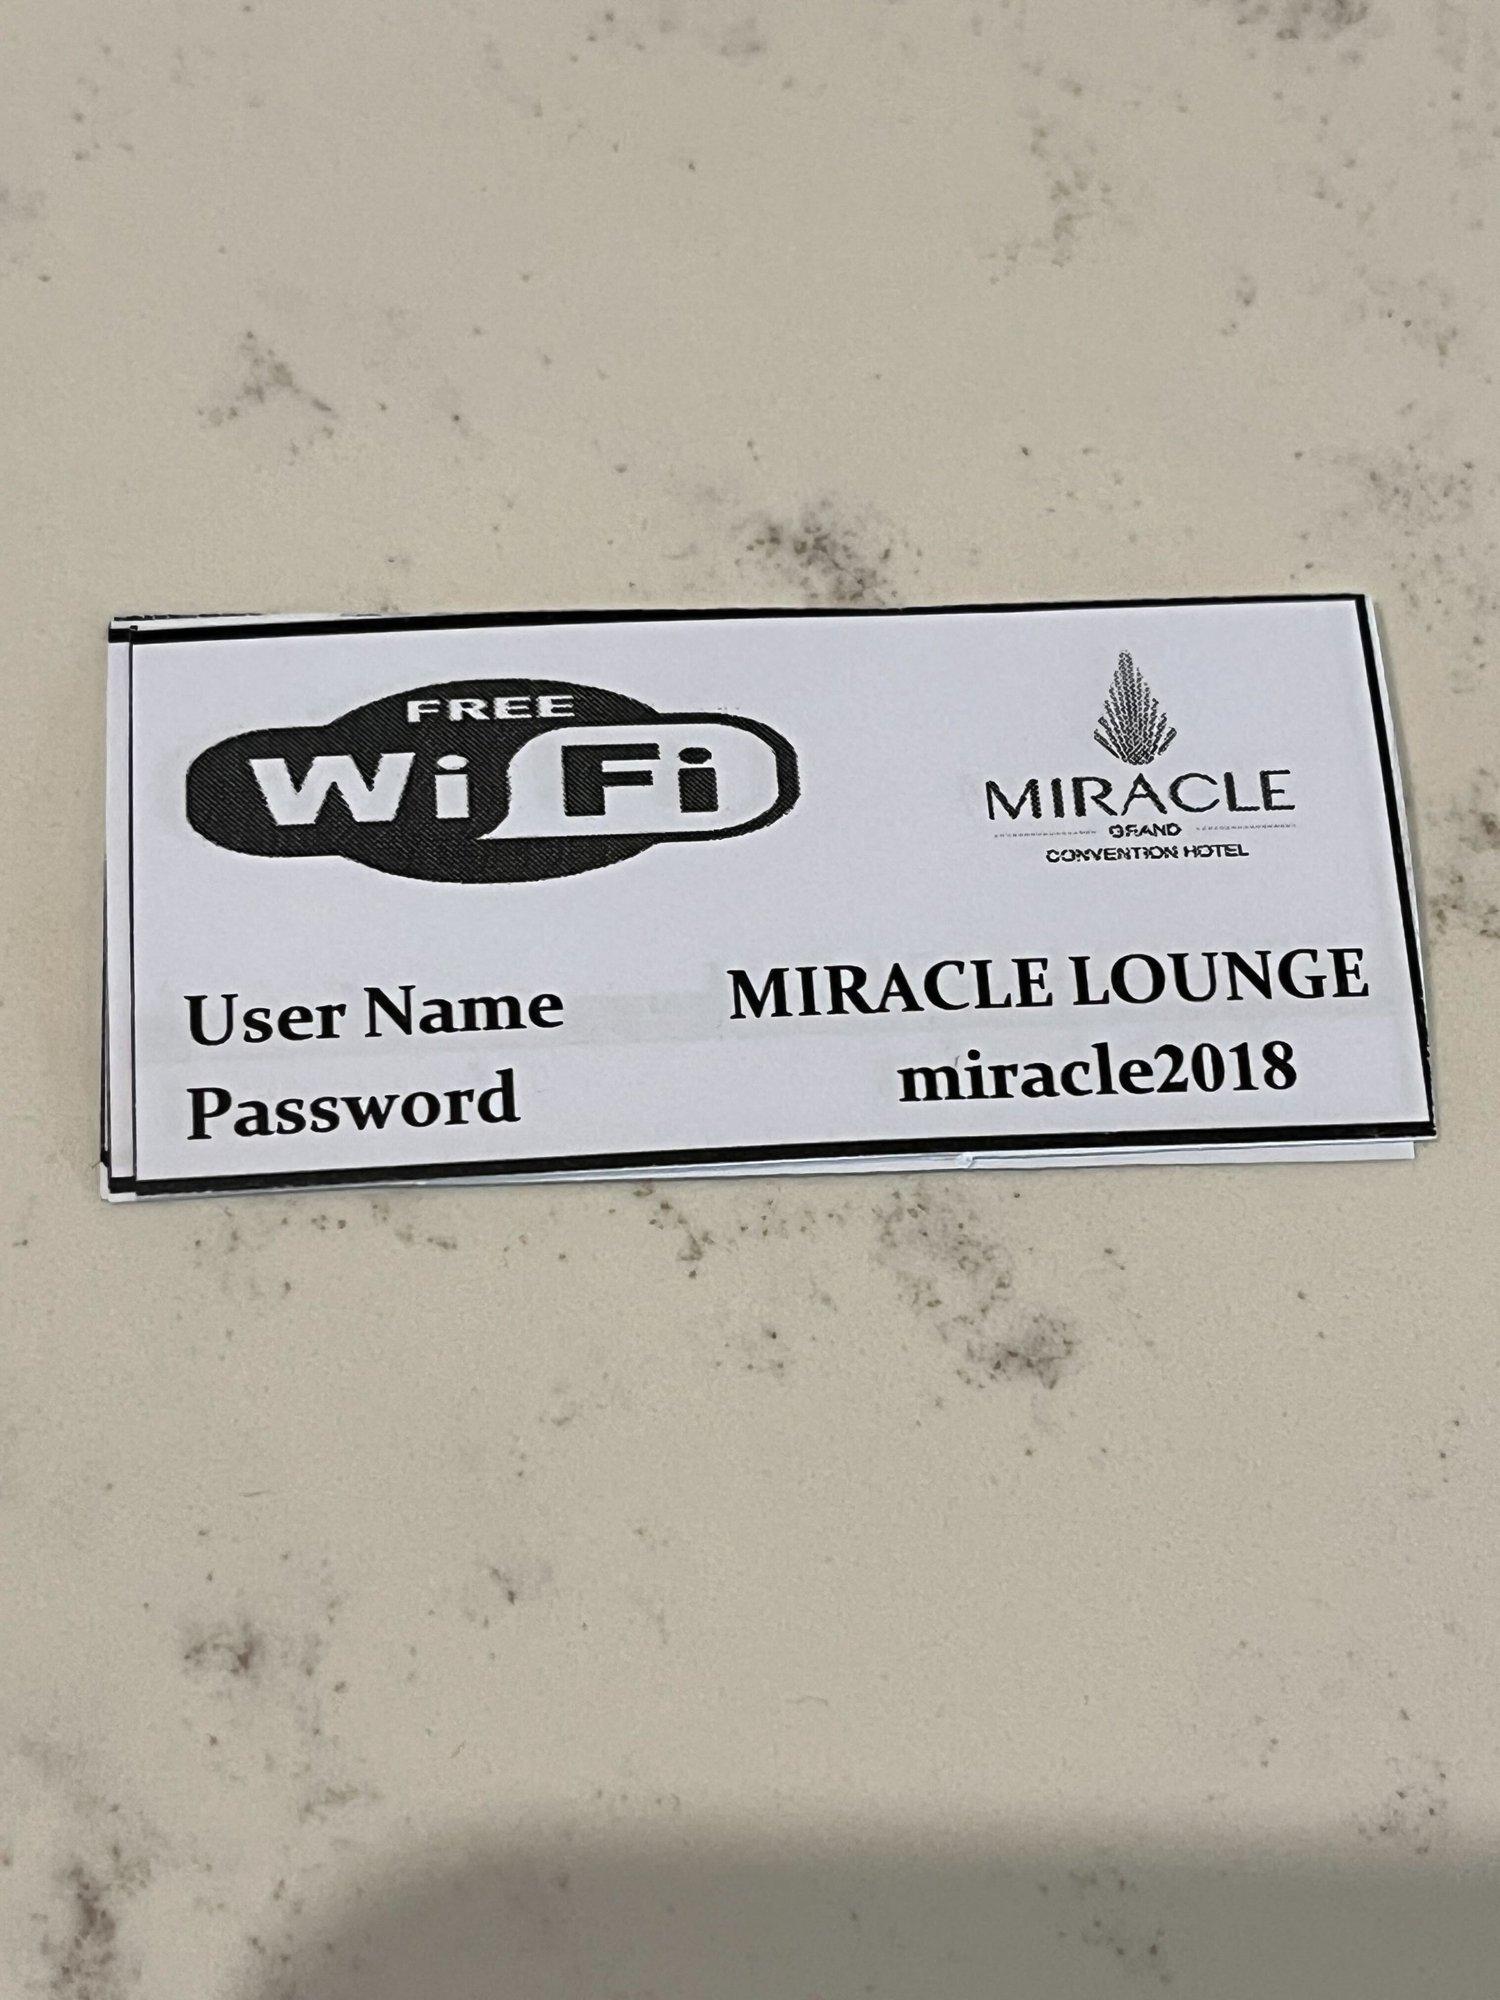 Miracle Lounge image 40 of 59